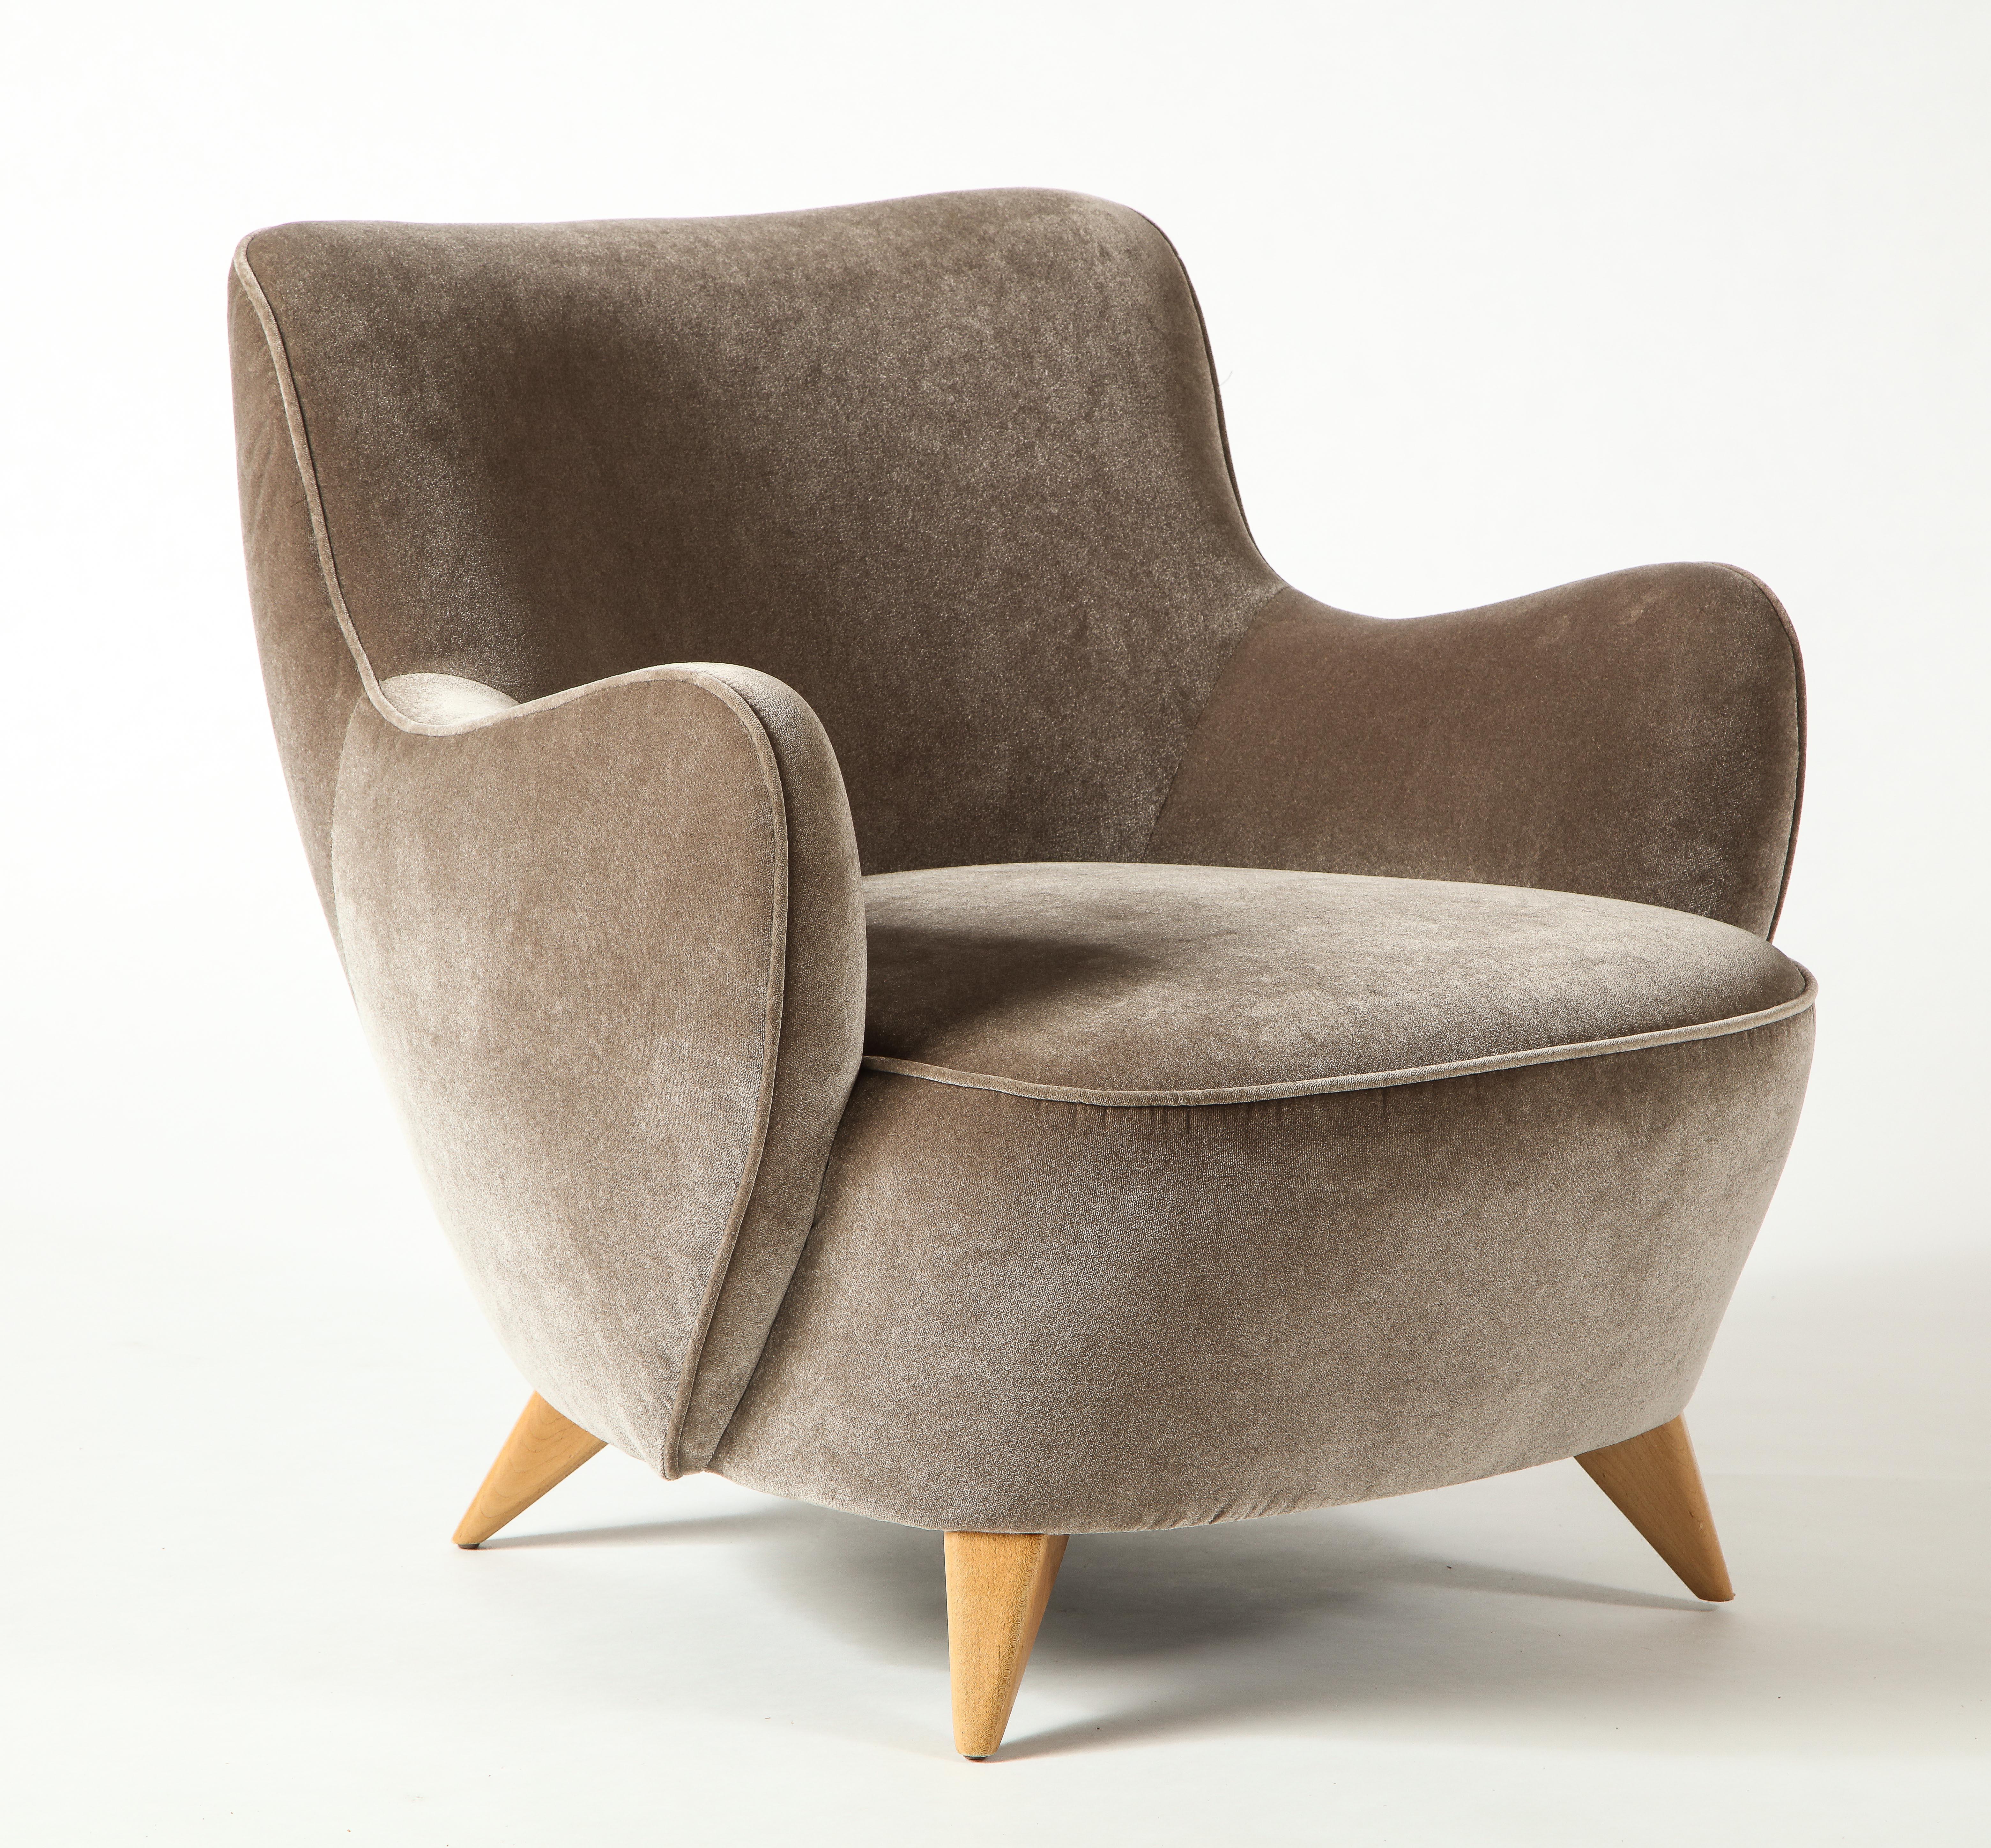 Vladimir Kagan Barrel Chair in Beige Upholstery with Natural Maple Base 1